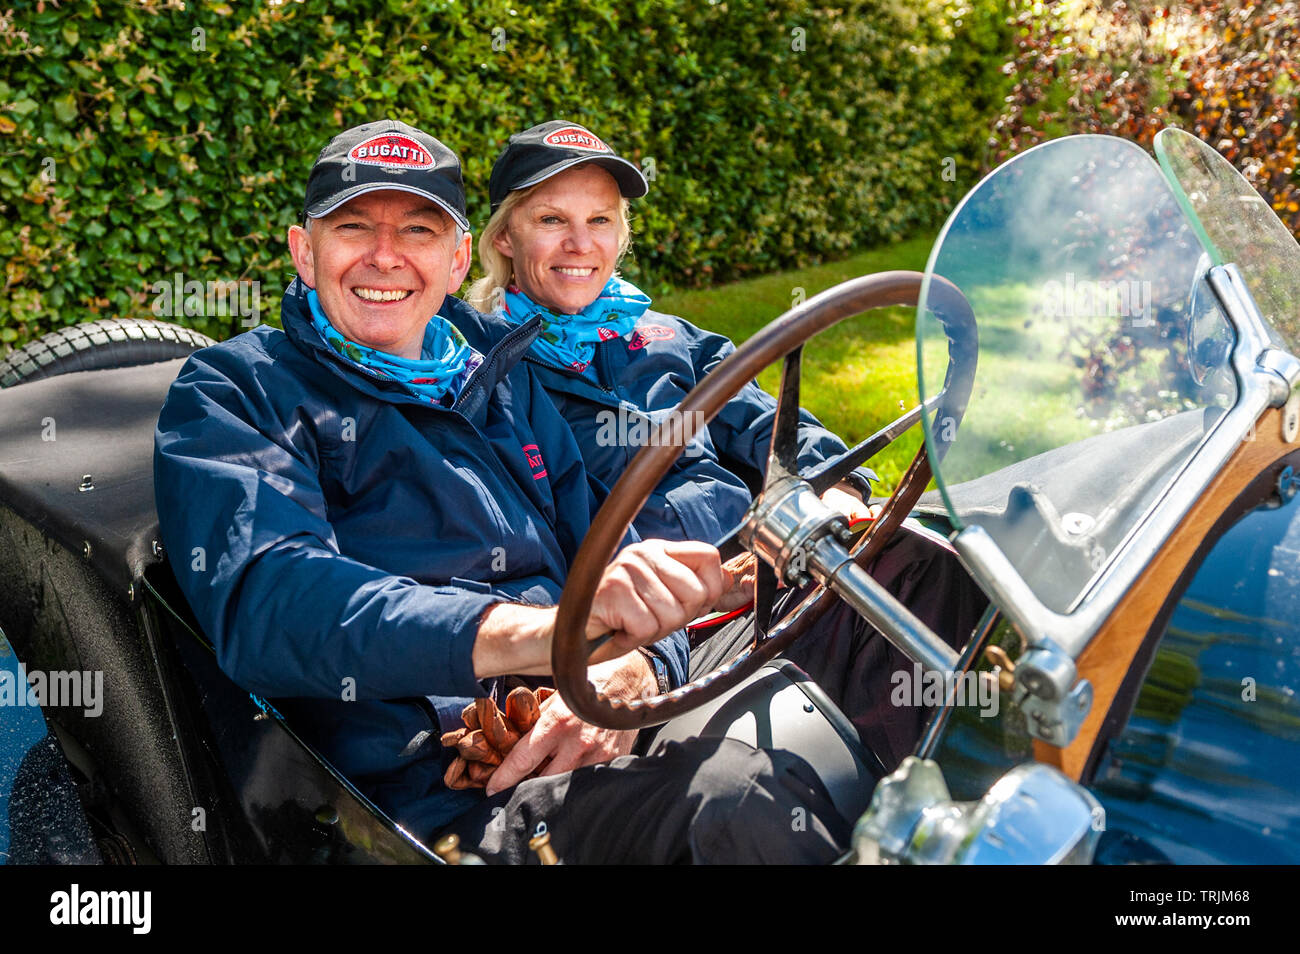 Bantry, West Cork, Ireland. 6th Juine, 2019. The Bugatti Owners Club is in Ireland this week for its annual international rally, featuring 100 vintage Bugatti's. After lunch in the West Lodge Hotel, the cars headed for the Mizen Head. At Bantry House & Gardens were Jonathan and Carey Botting from London in their 1924 Type 22 Brescia Bugatti. Credit: Andy Gibson/Alamy Live News.. Stock Photo